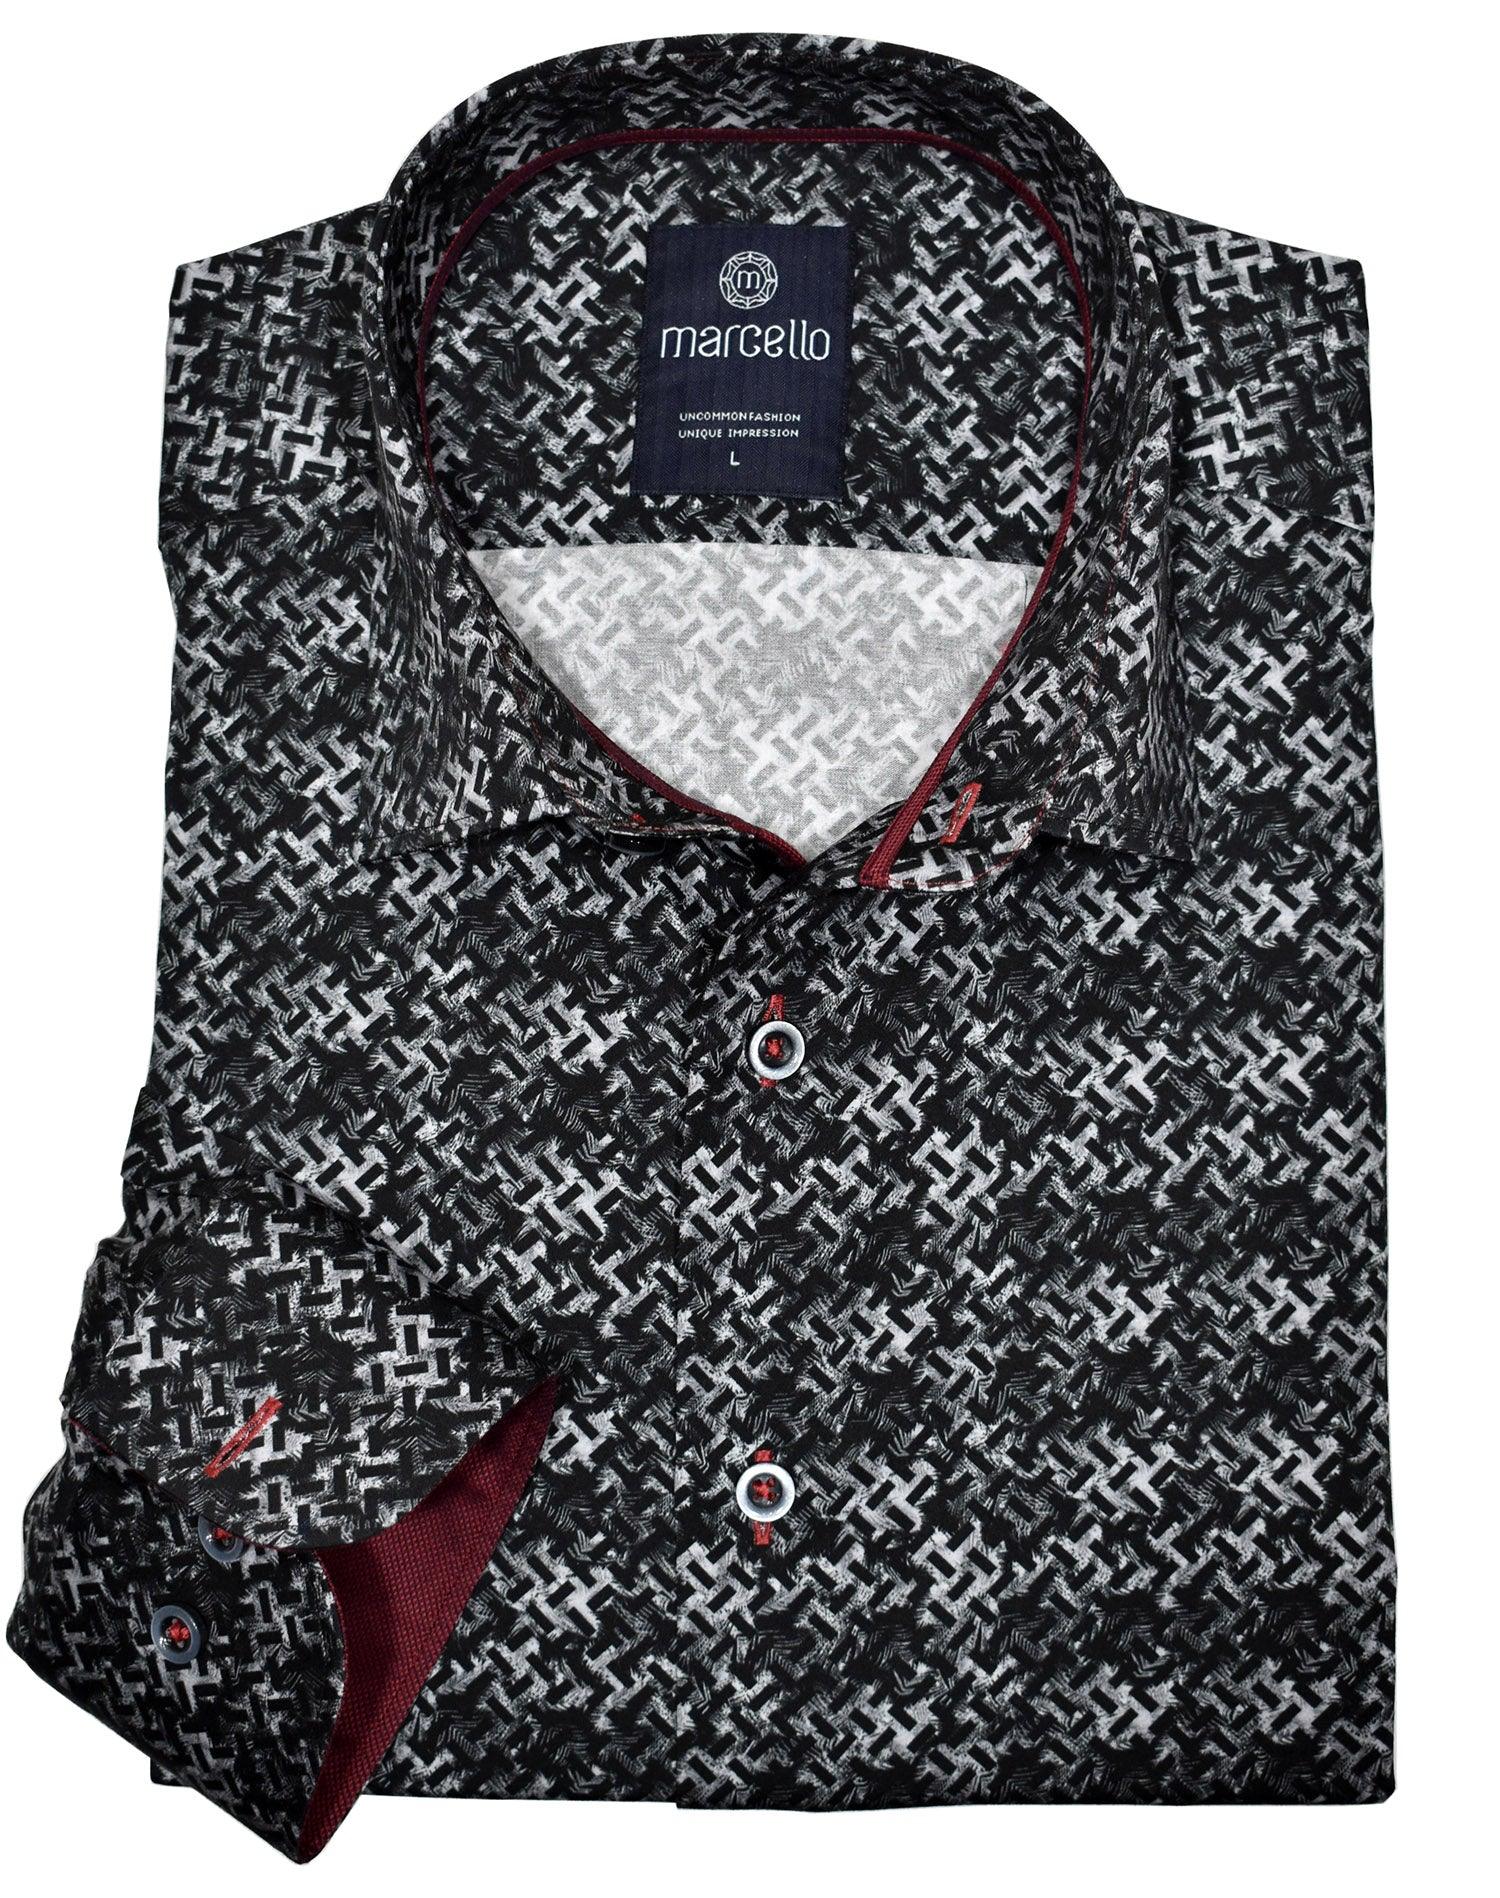 You can never have enough sharp shirts to go with your black - charcoal colors.  This fashion print with signature contrast color trim and stitching will be your favorite new shirt.  Soft cotton fabric. Updated rich pattern looks great. Royal oxford trim fabric adds a regal image. Contrast button stitches and hand selected buttons. Medium collar. Classic shaped fit.